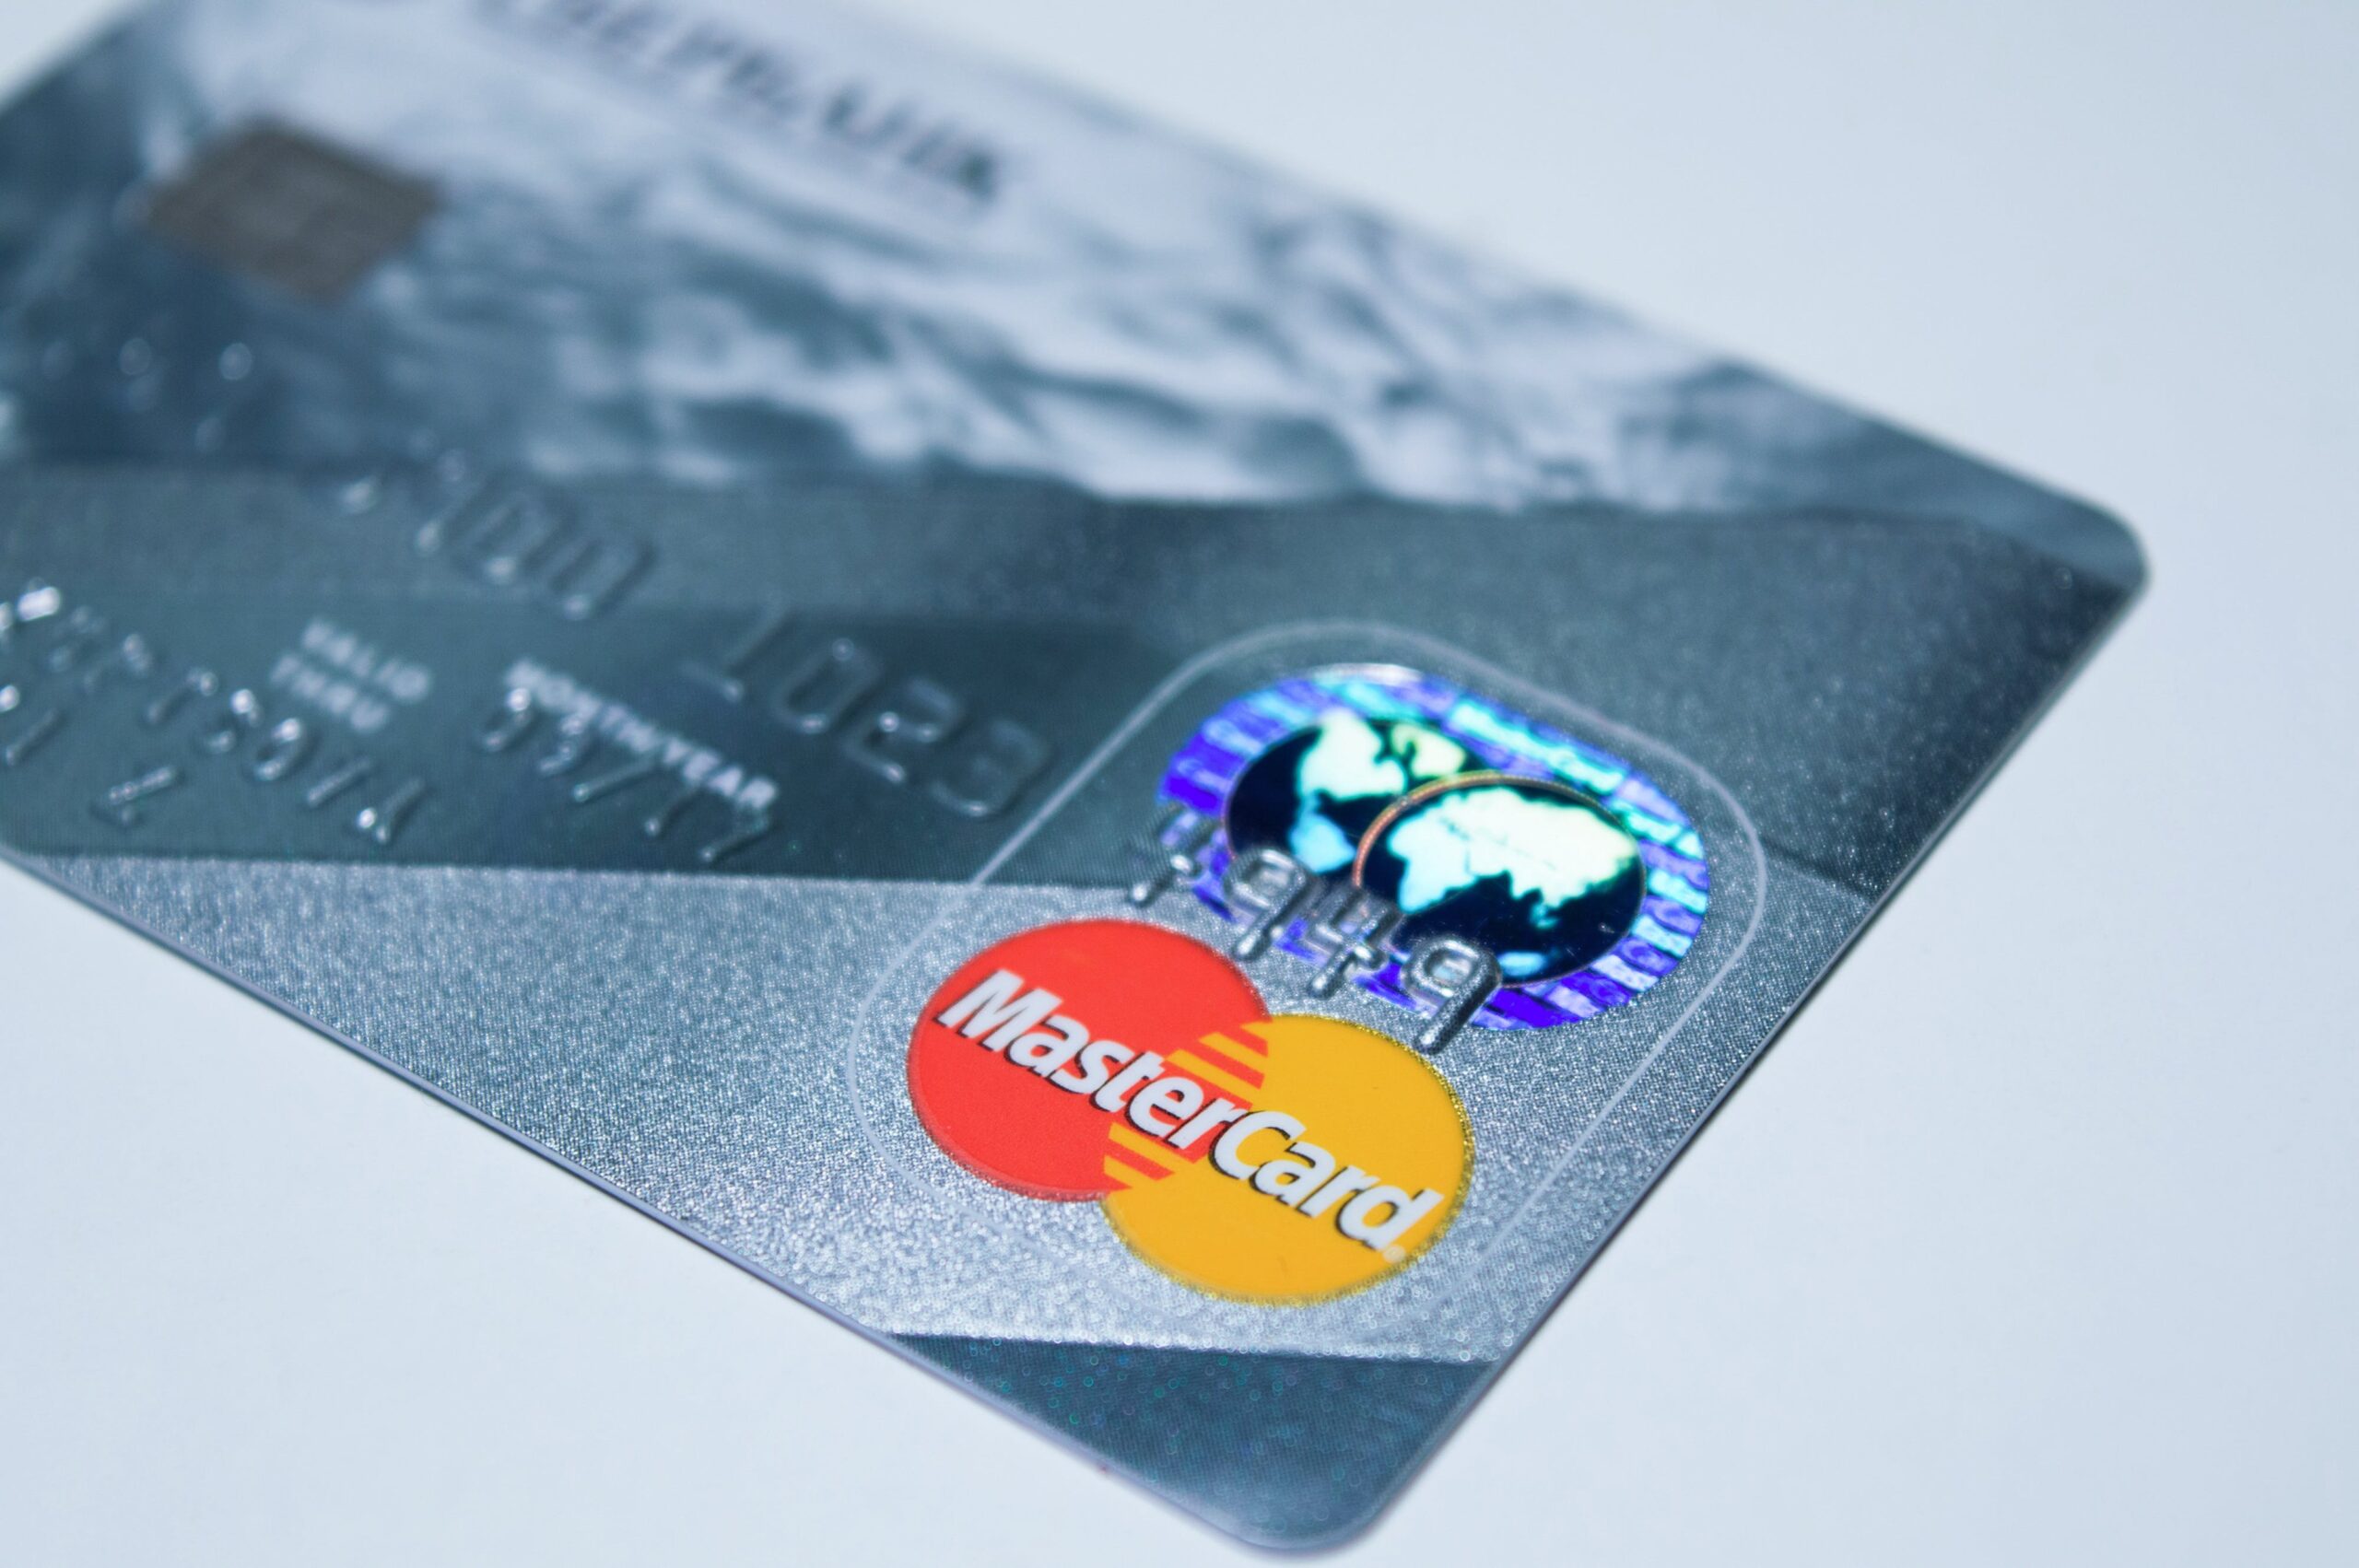 Mastercard and Awash Bank partner to launch enhanced payment options in Ethiopia